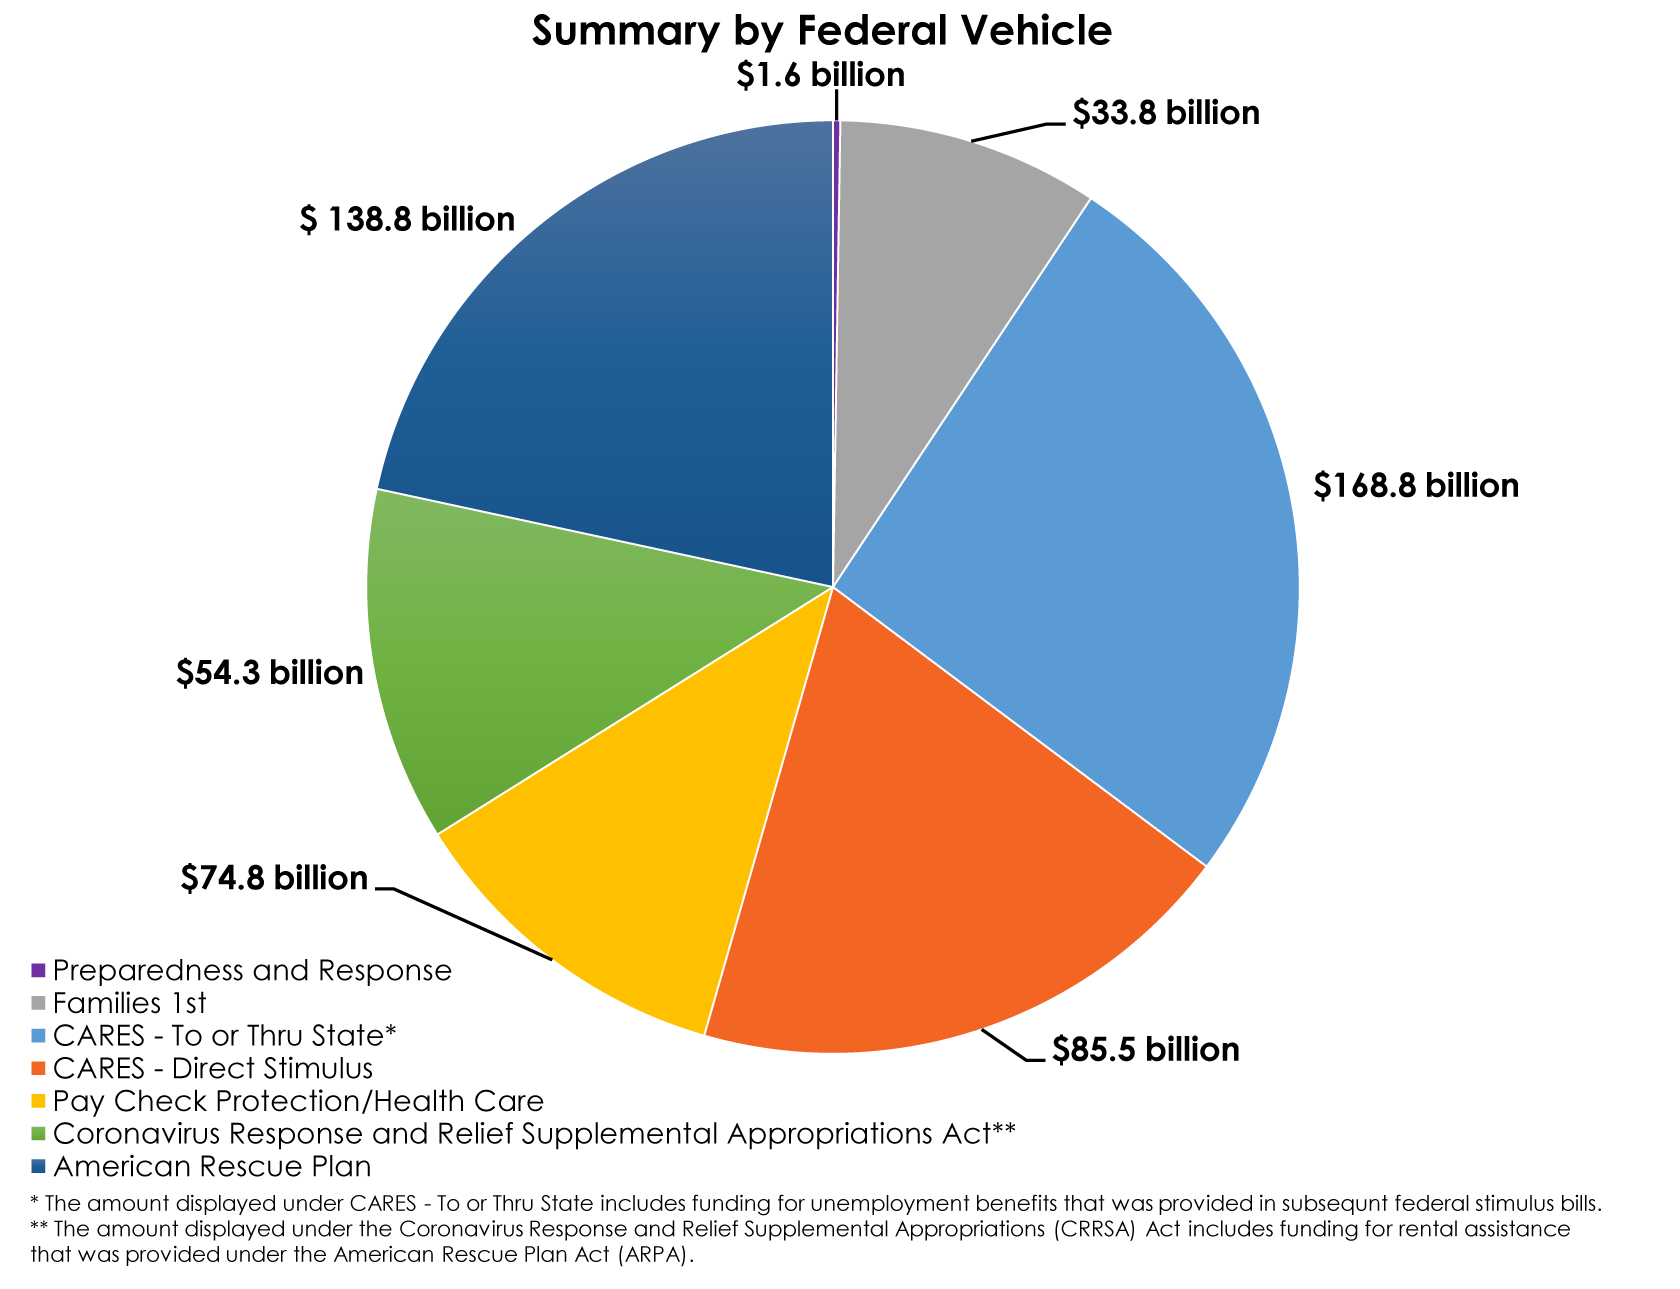 Pie Chart of Summary by Federal Vehicle